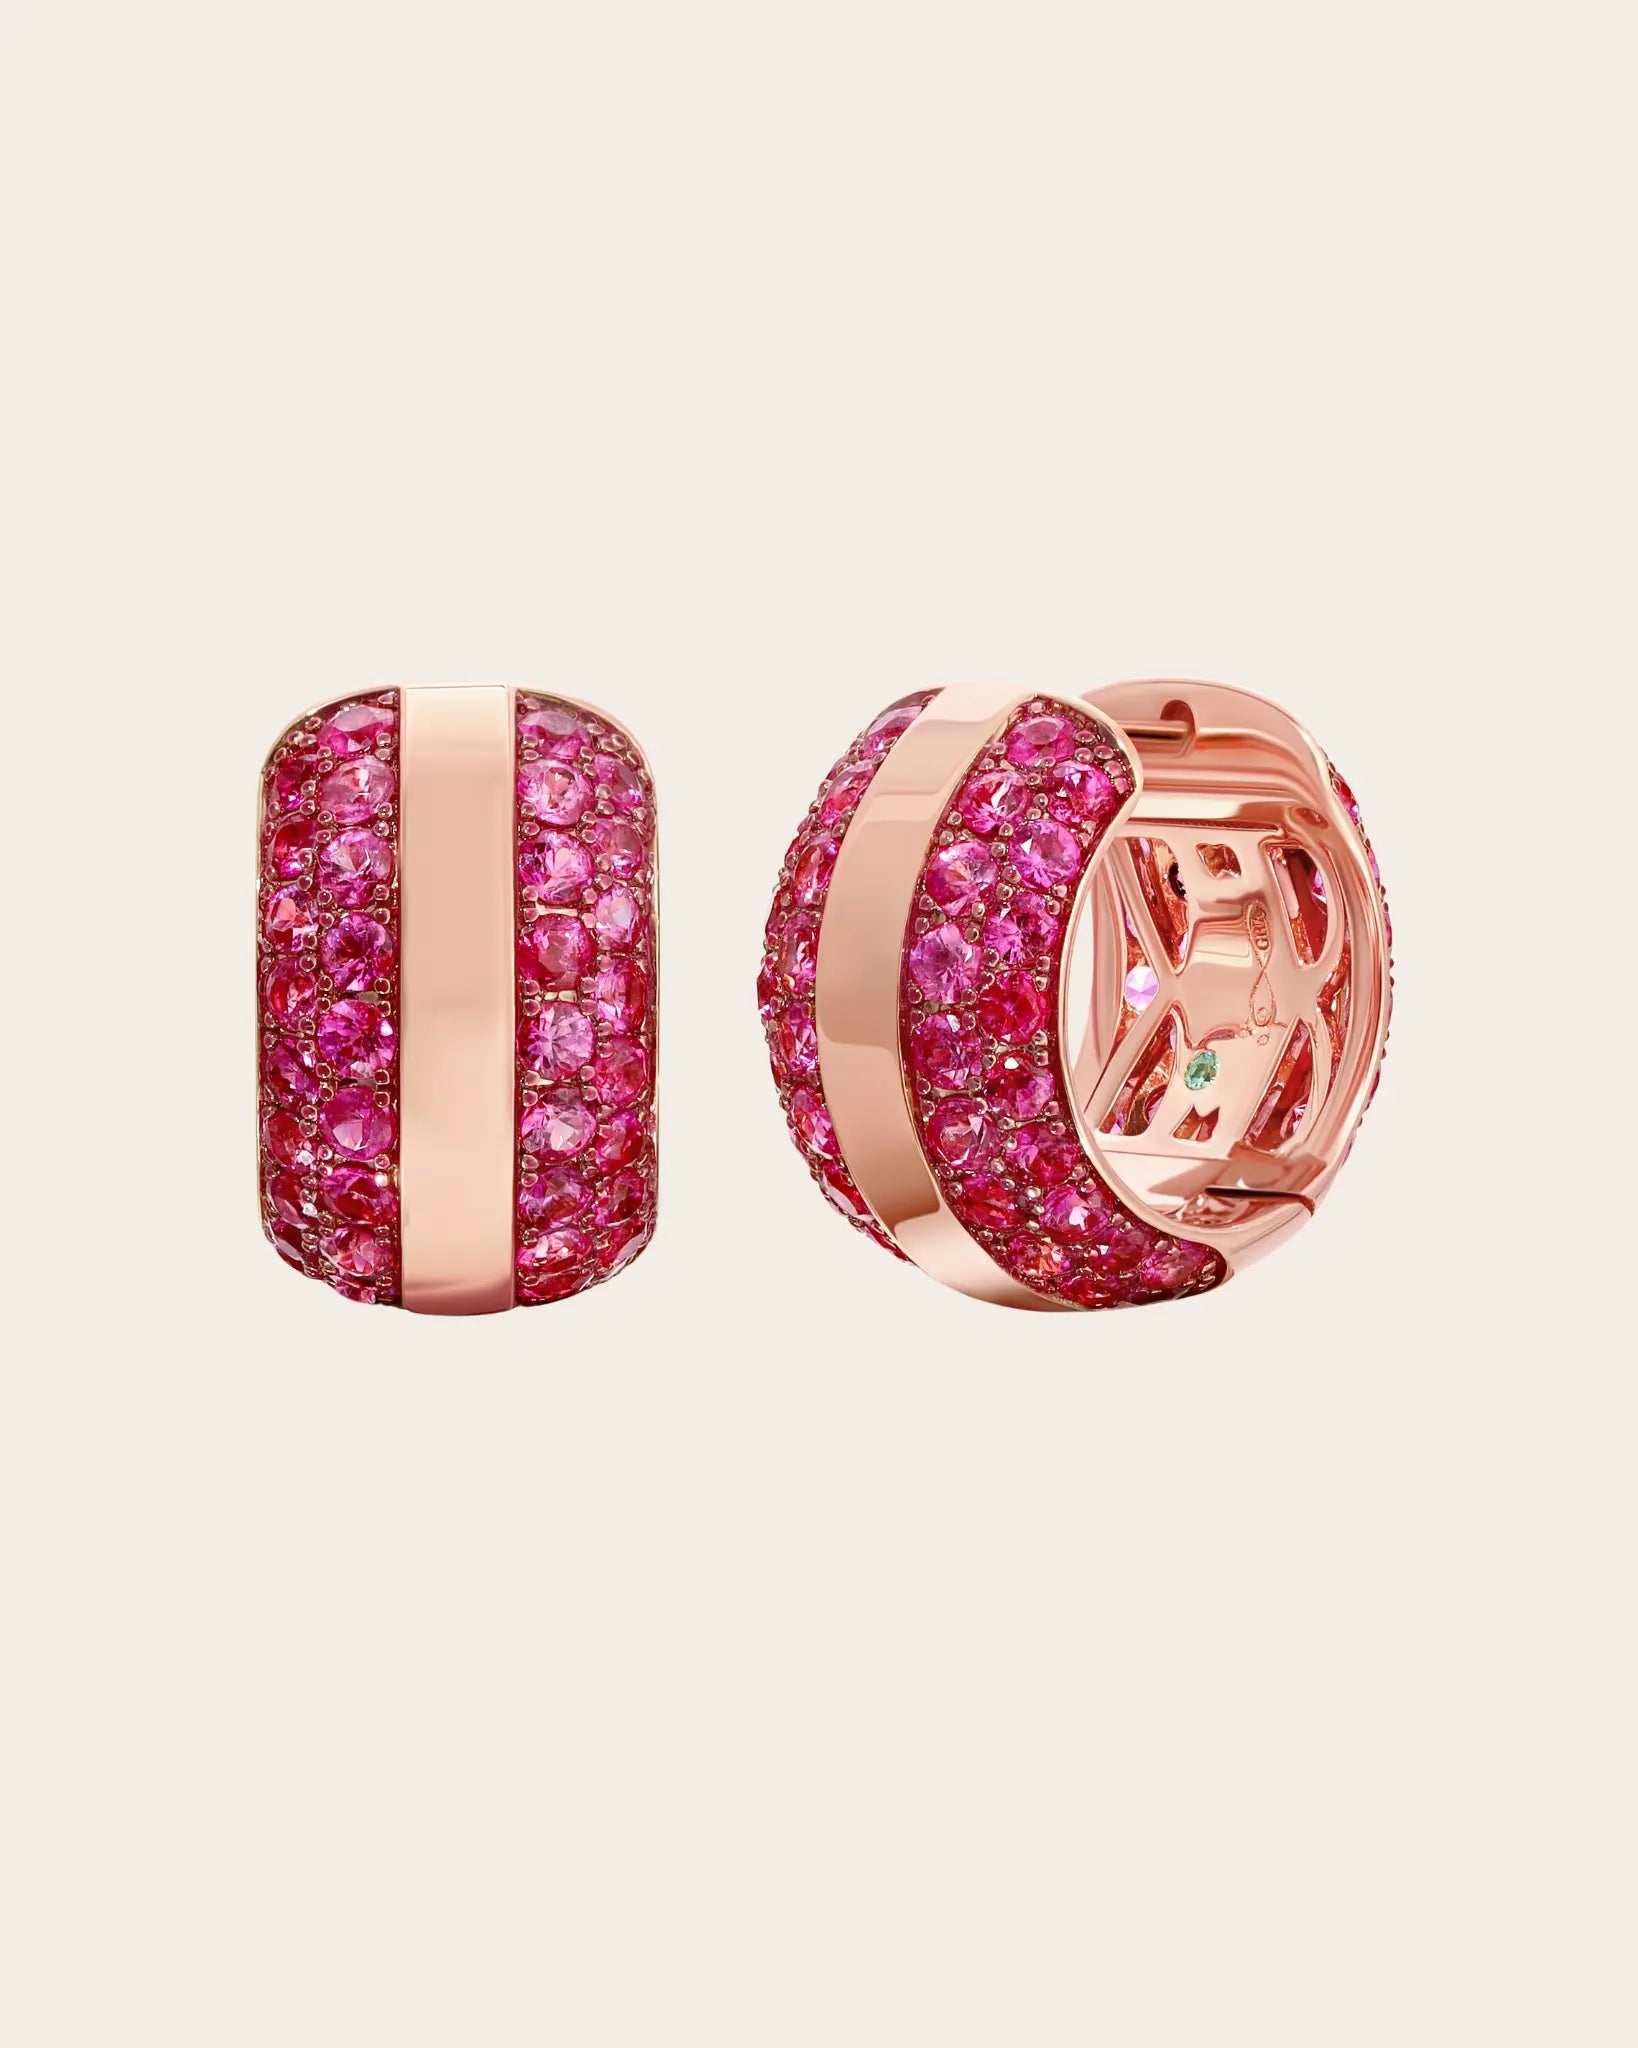 OURO PINK SAPPHIRE HOOP EARRINGS OURO PINK SAPPHIRE HOOP EARRINGS Graziela Gems Graziela Gems  Squash Blossom Vail